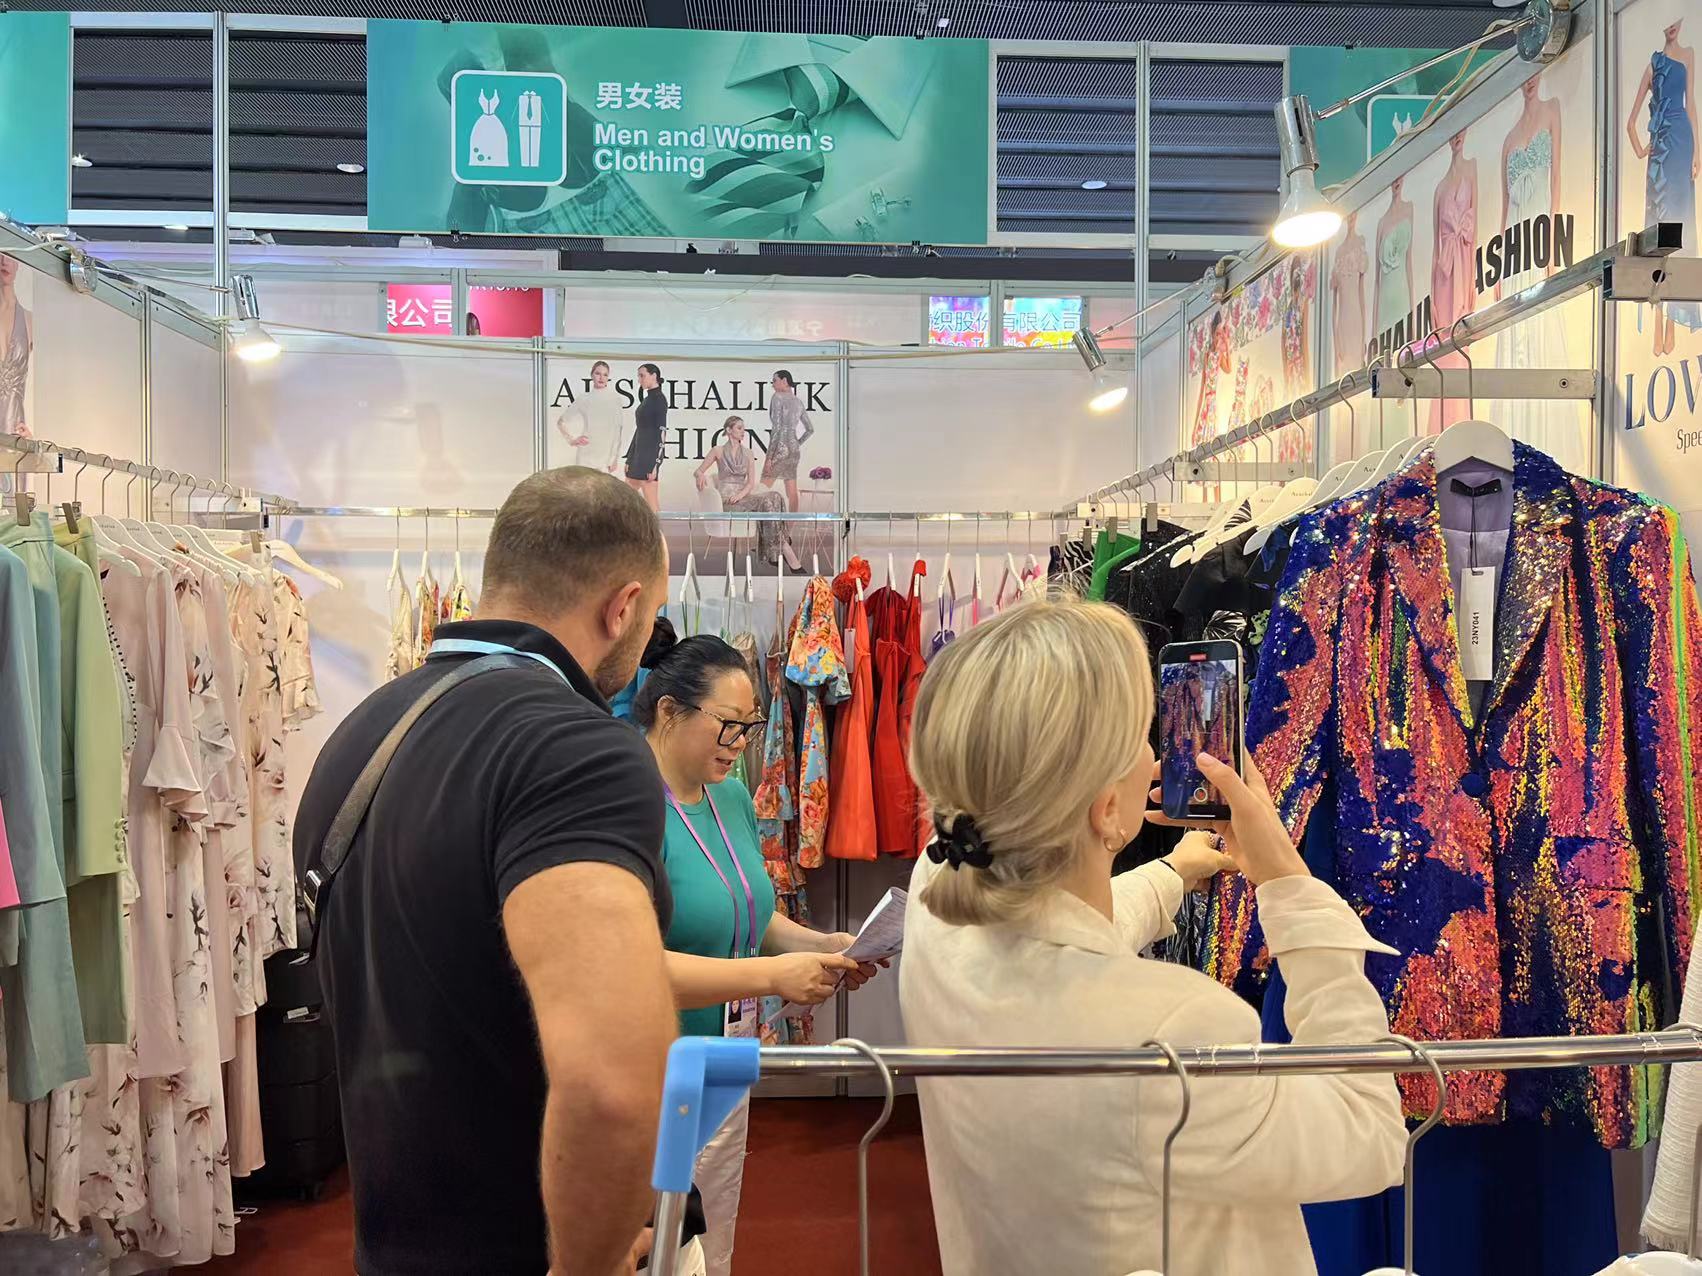 China Clothing Fair Wraps Up: Looking Forward to the Next Encounter